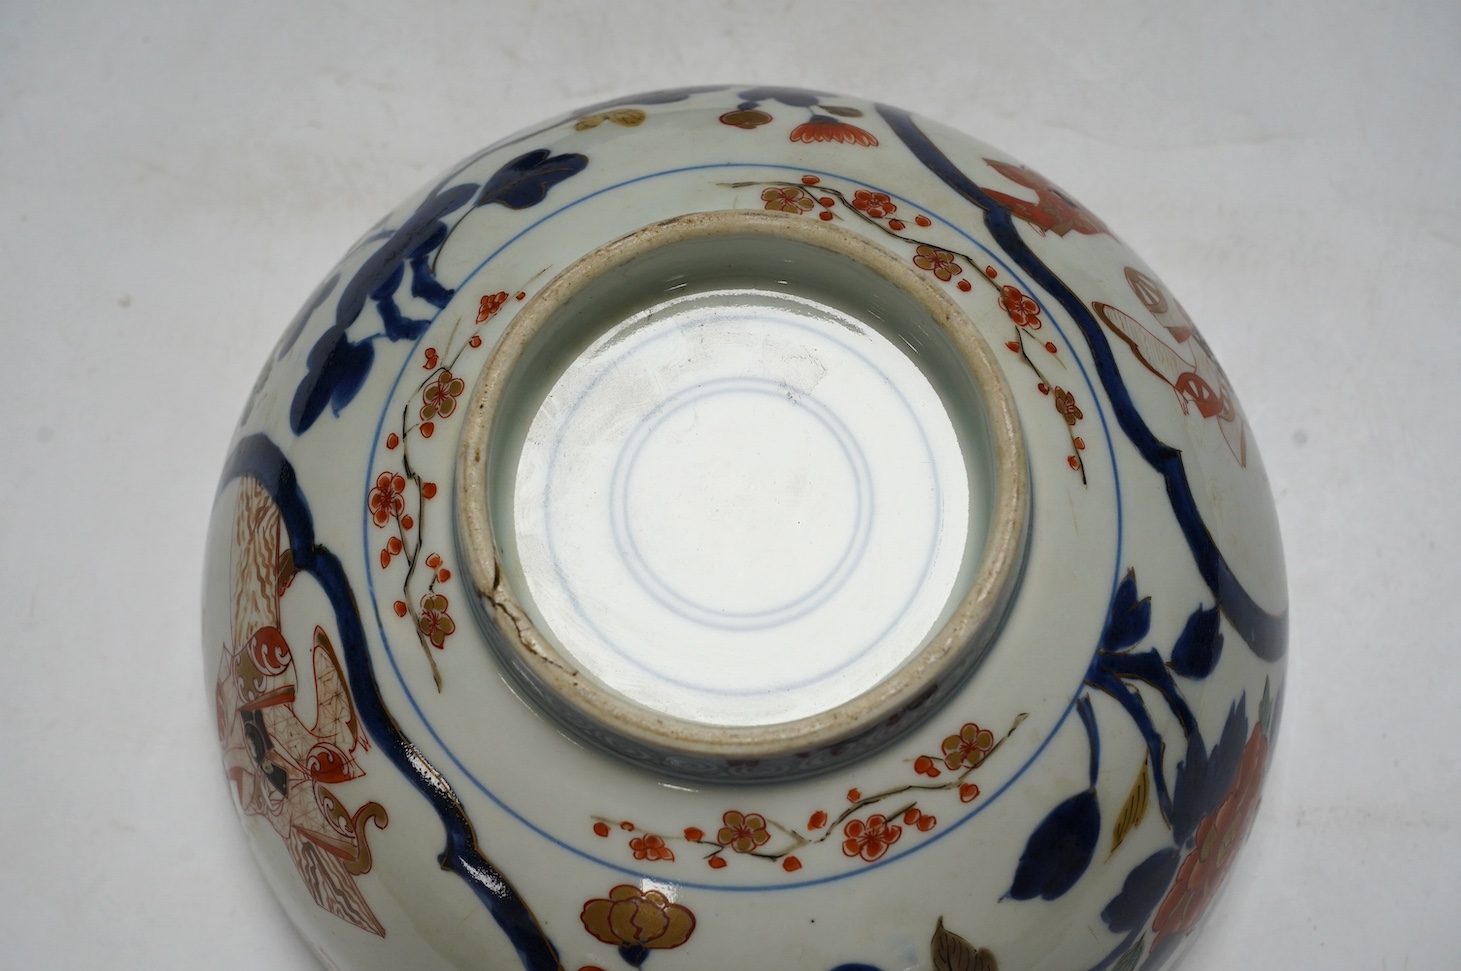 A Japanese Arita polychrome bowl, c.1700, diameter 24.5cm, height 12.5cm, on a carved hardwood stand. Condition - large overglazed open firing crack to foot, otherwise good